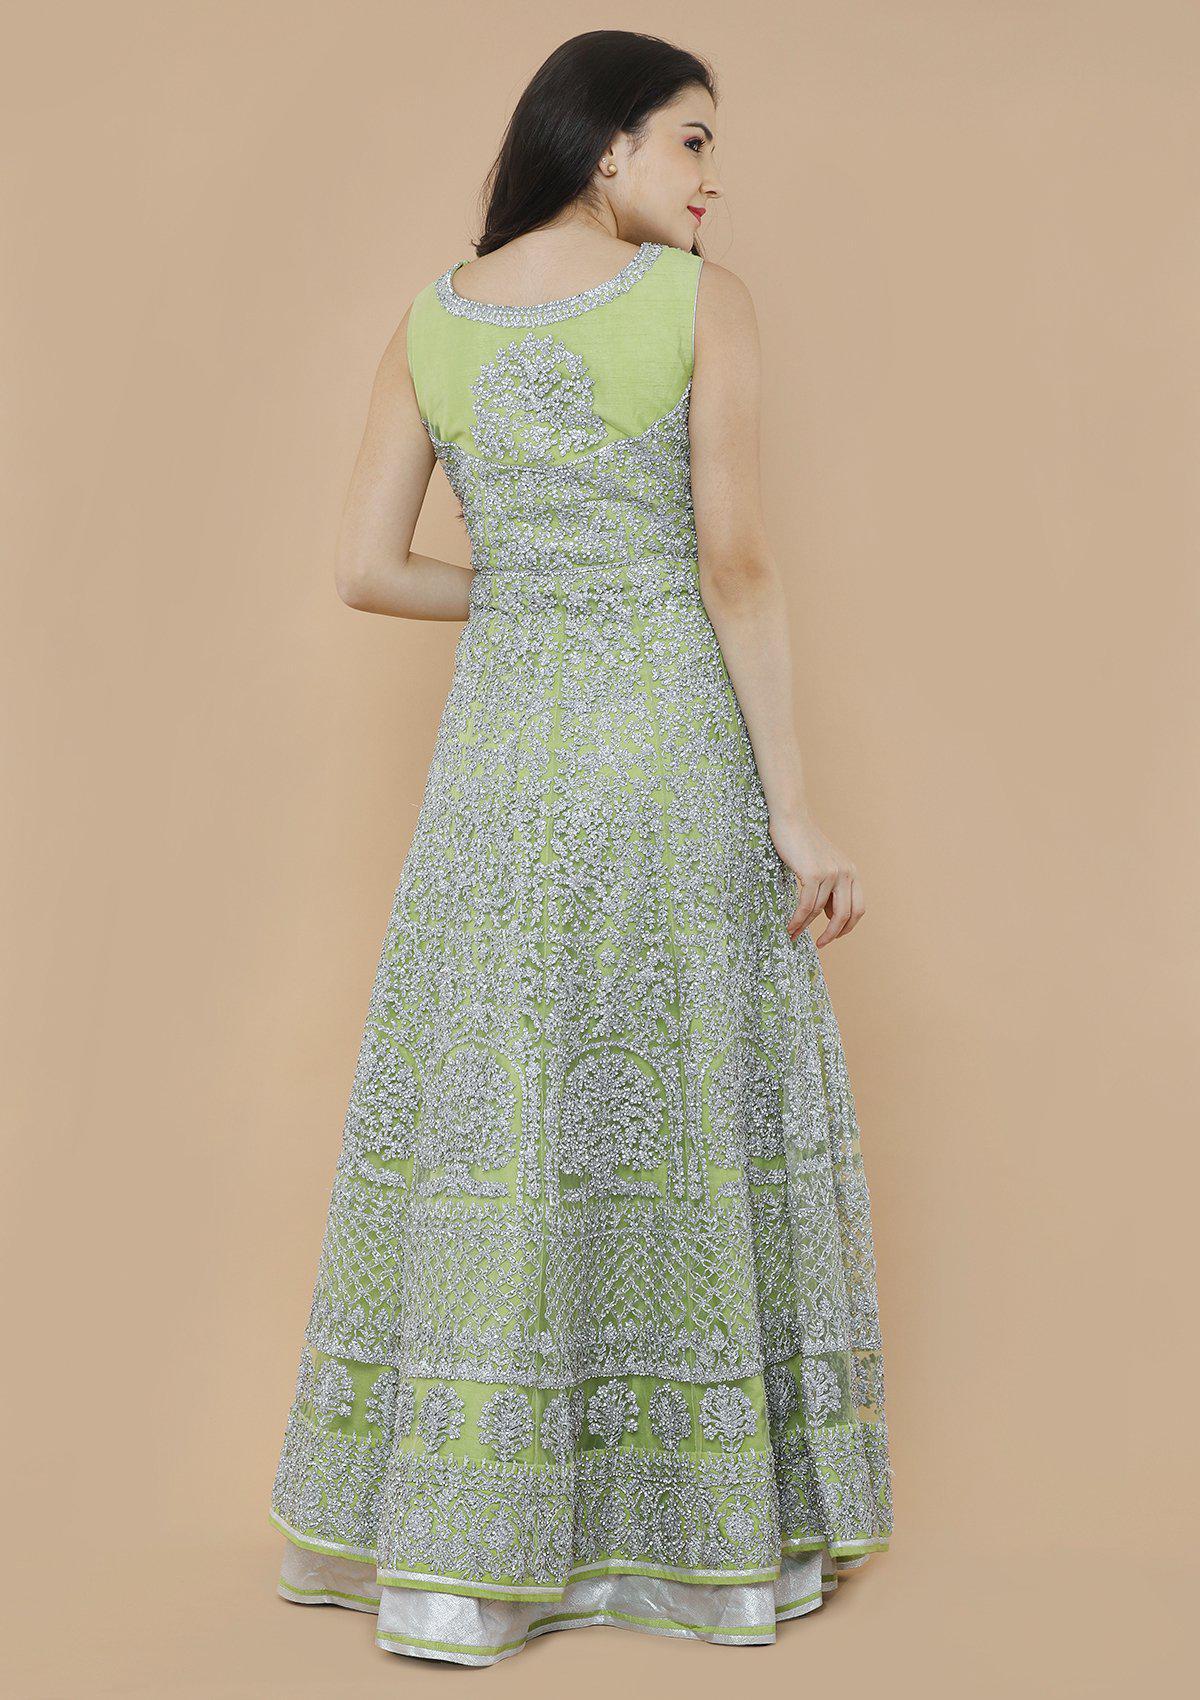 Green and Silver Net Designer Gown-Koskii